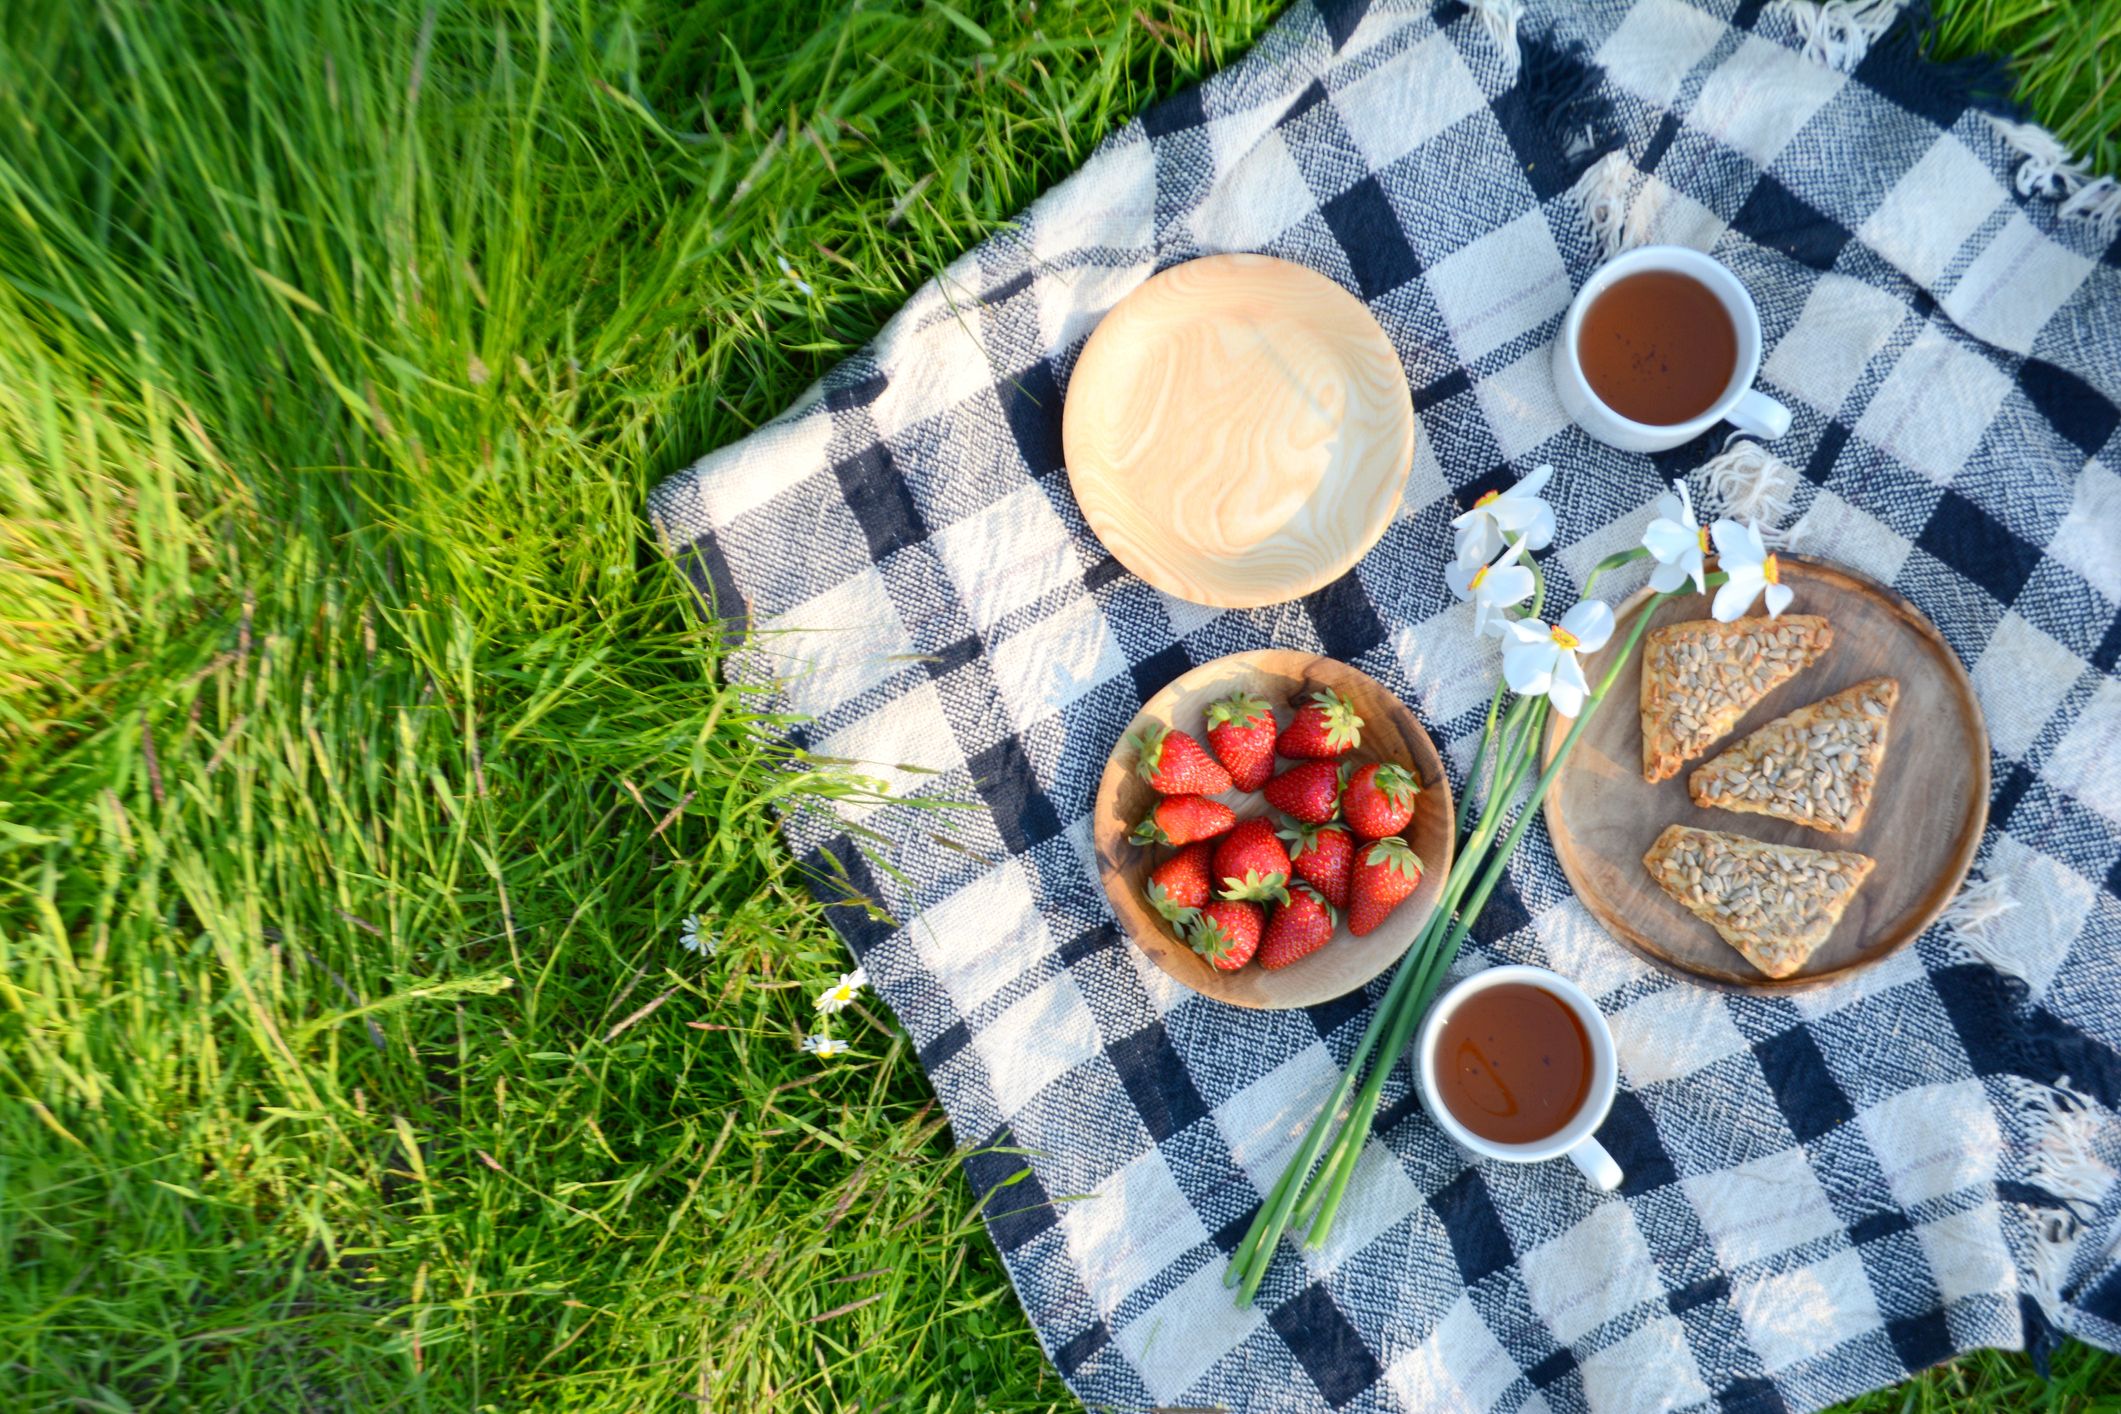 https://hips.hearstapps.com/hmg-prod/images/picnic-in-the-park-on-the-green-grass-with-berry-royalty-free-image-1595003803.jpg